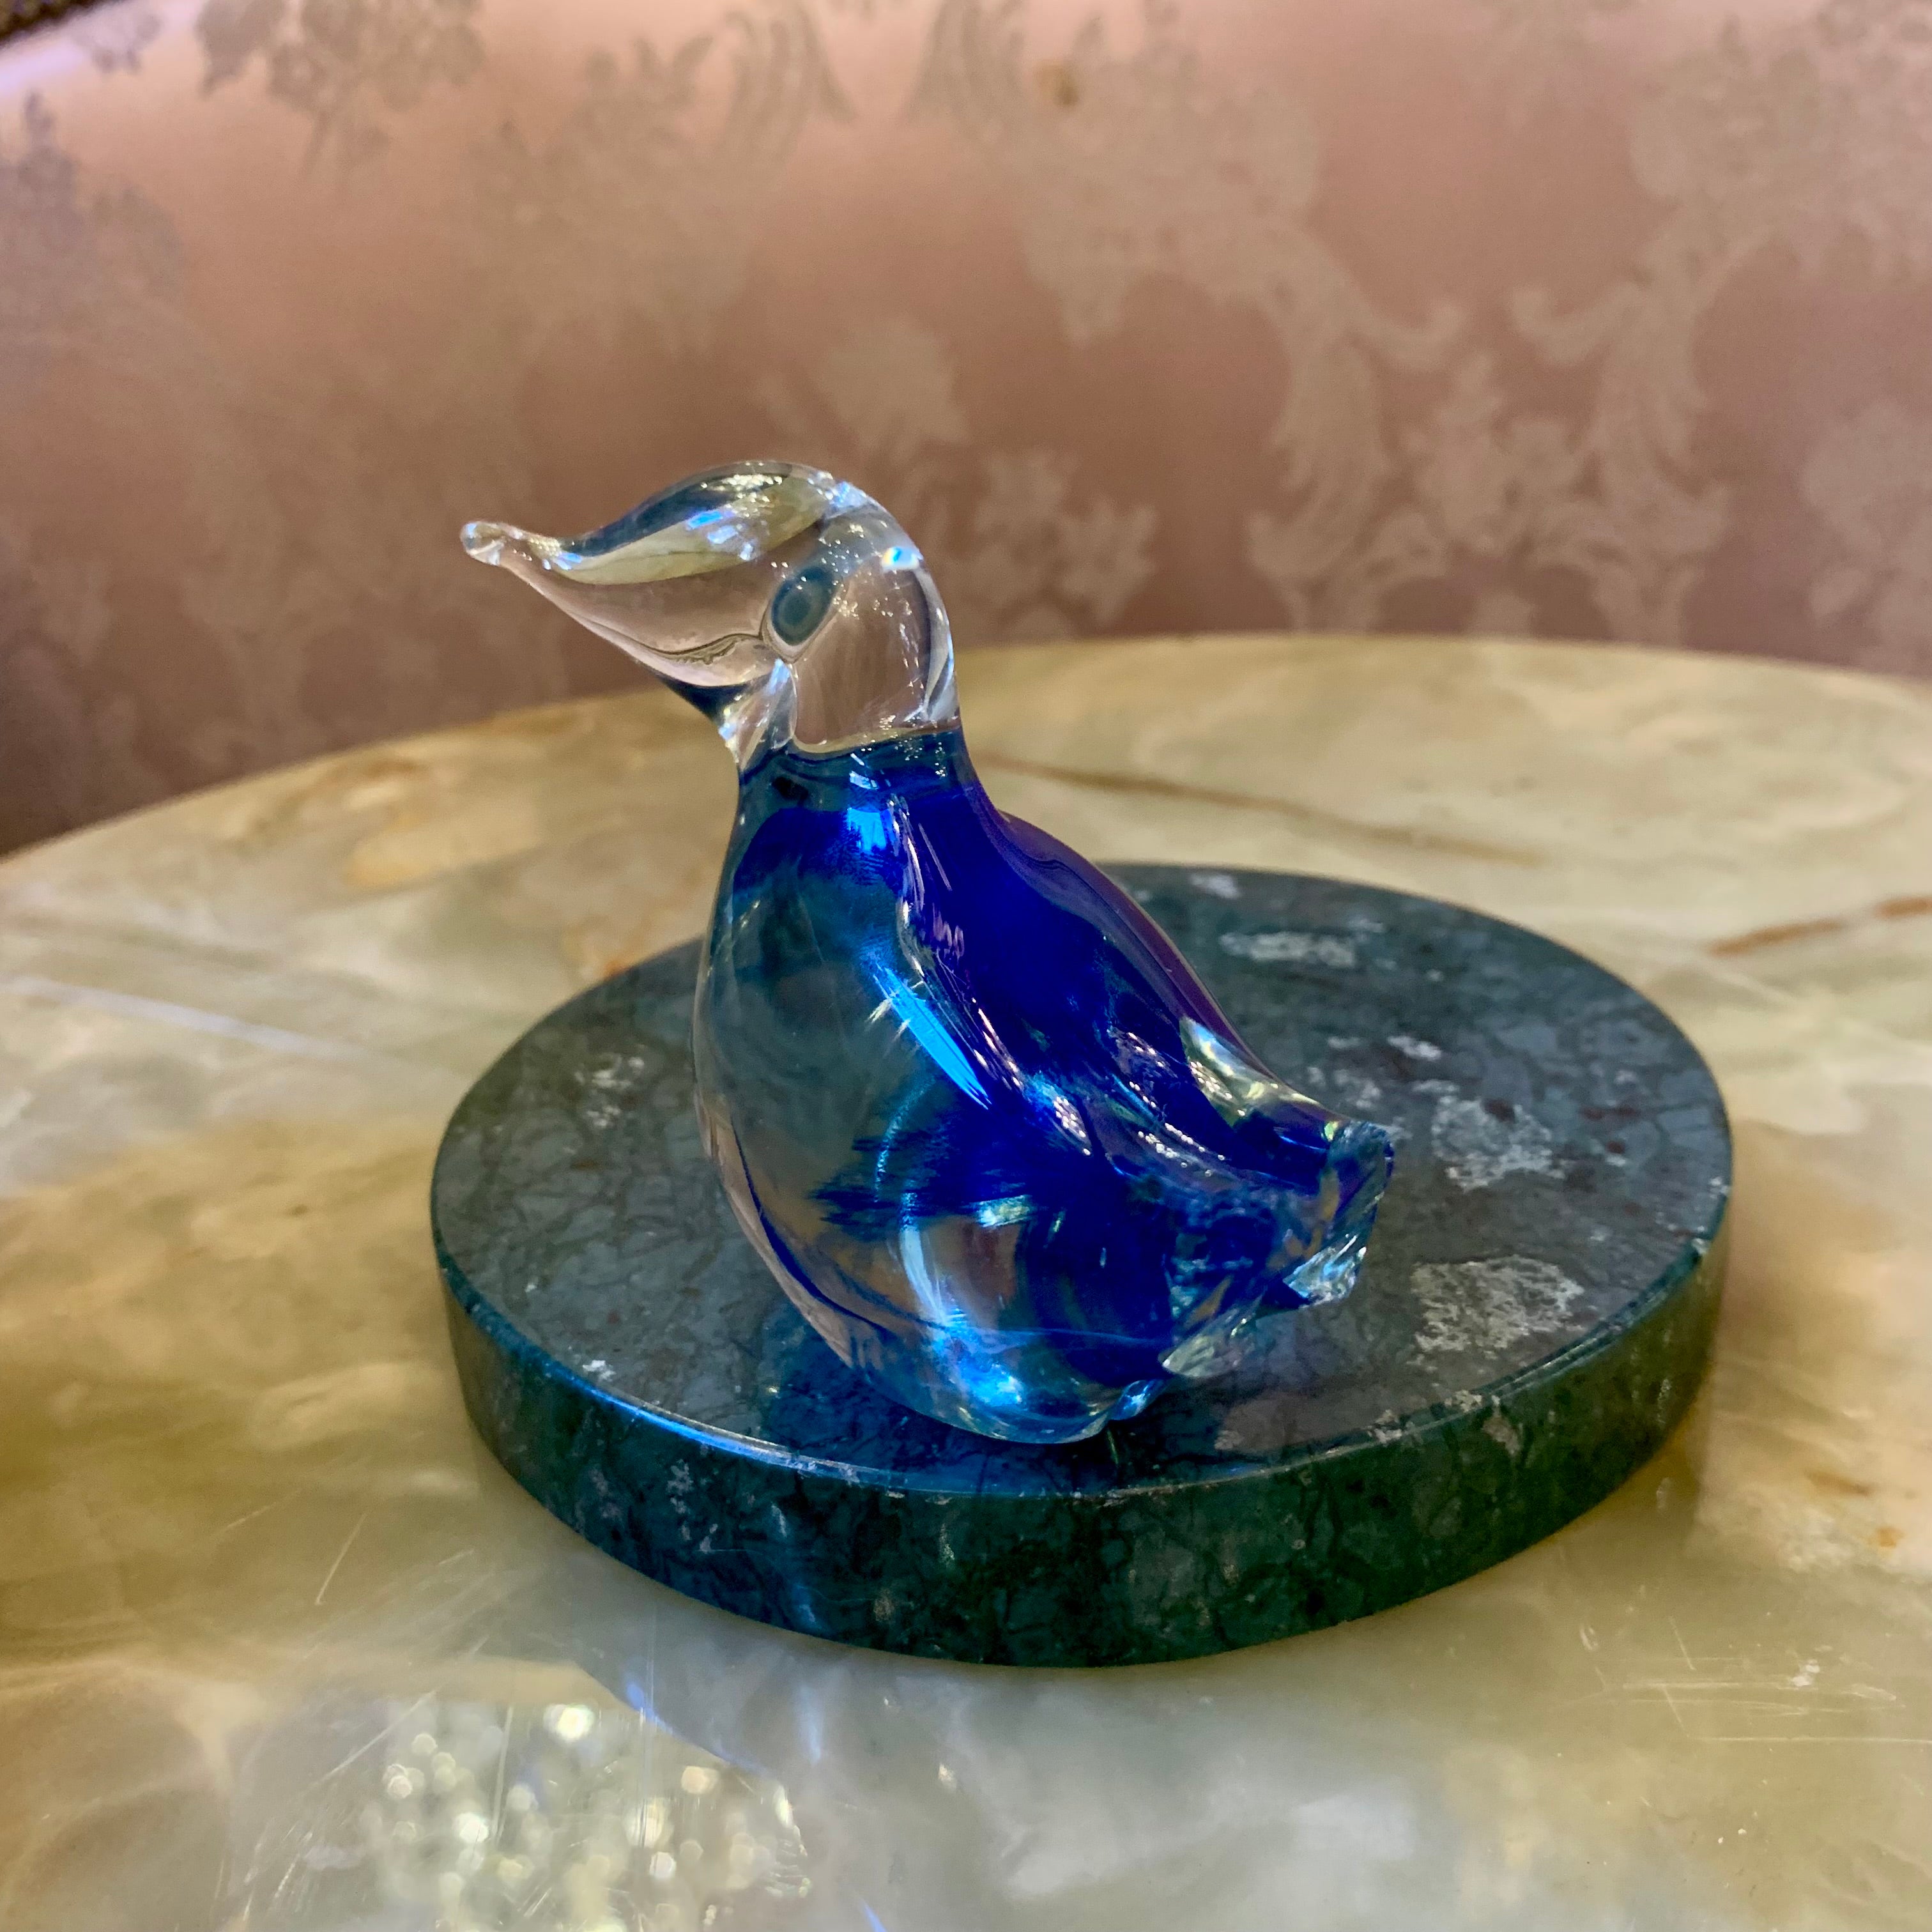 Pretty Clear and Blue Murano Bird Paperweight